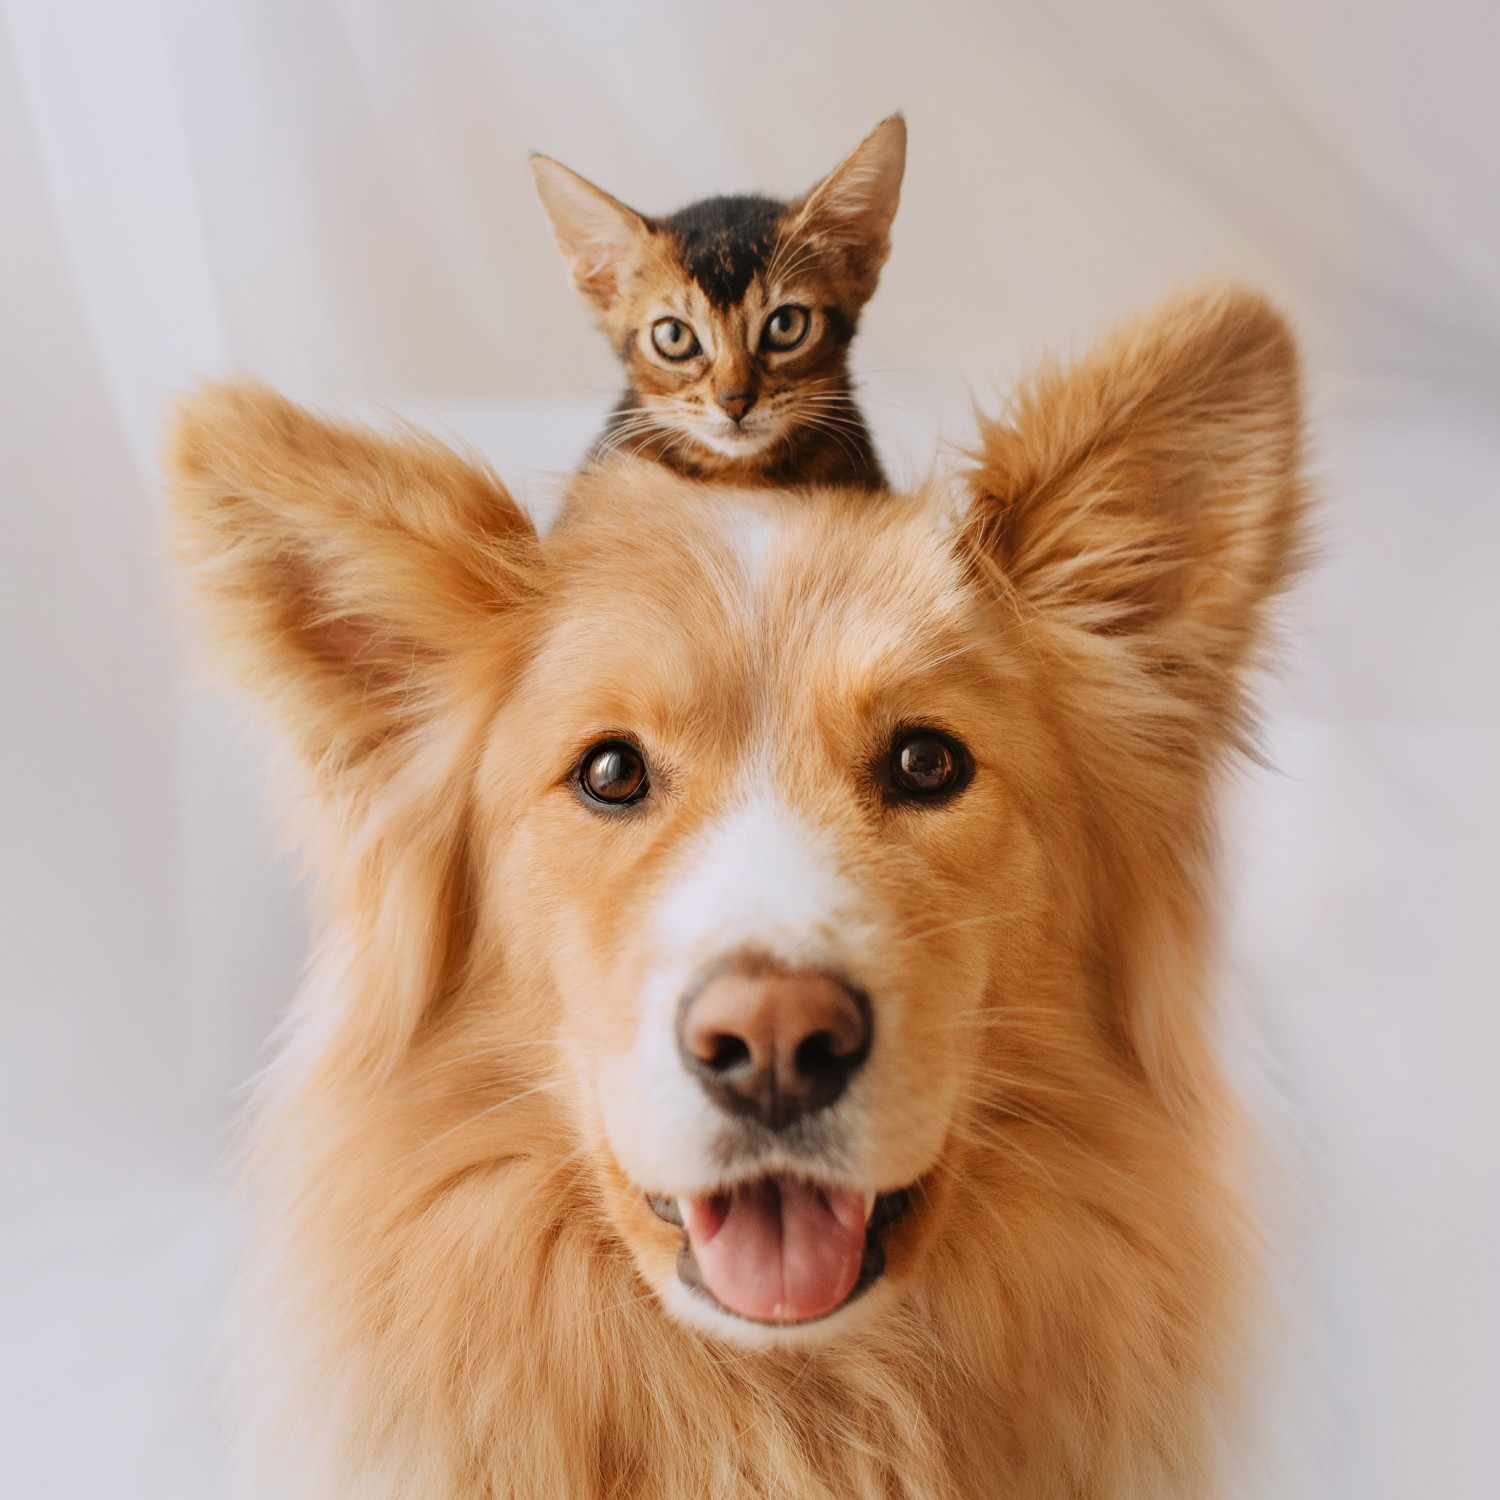 Puppy & Kitten Care Consultations | VetMoment In-Home & Mobile Services in Franklin, TN